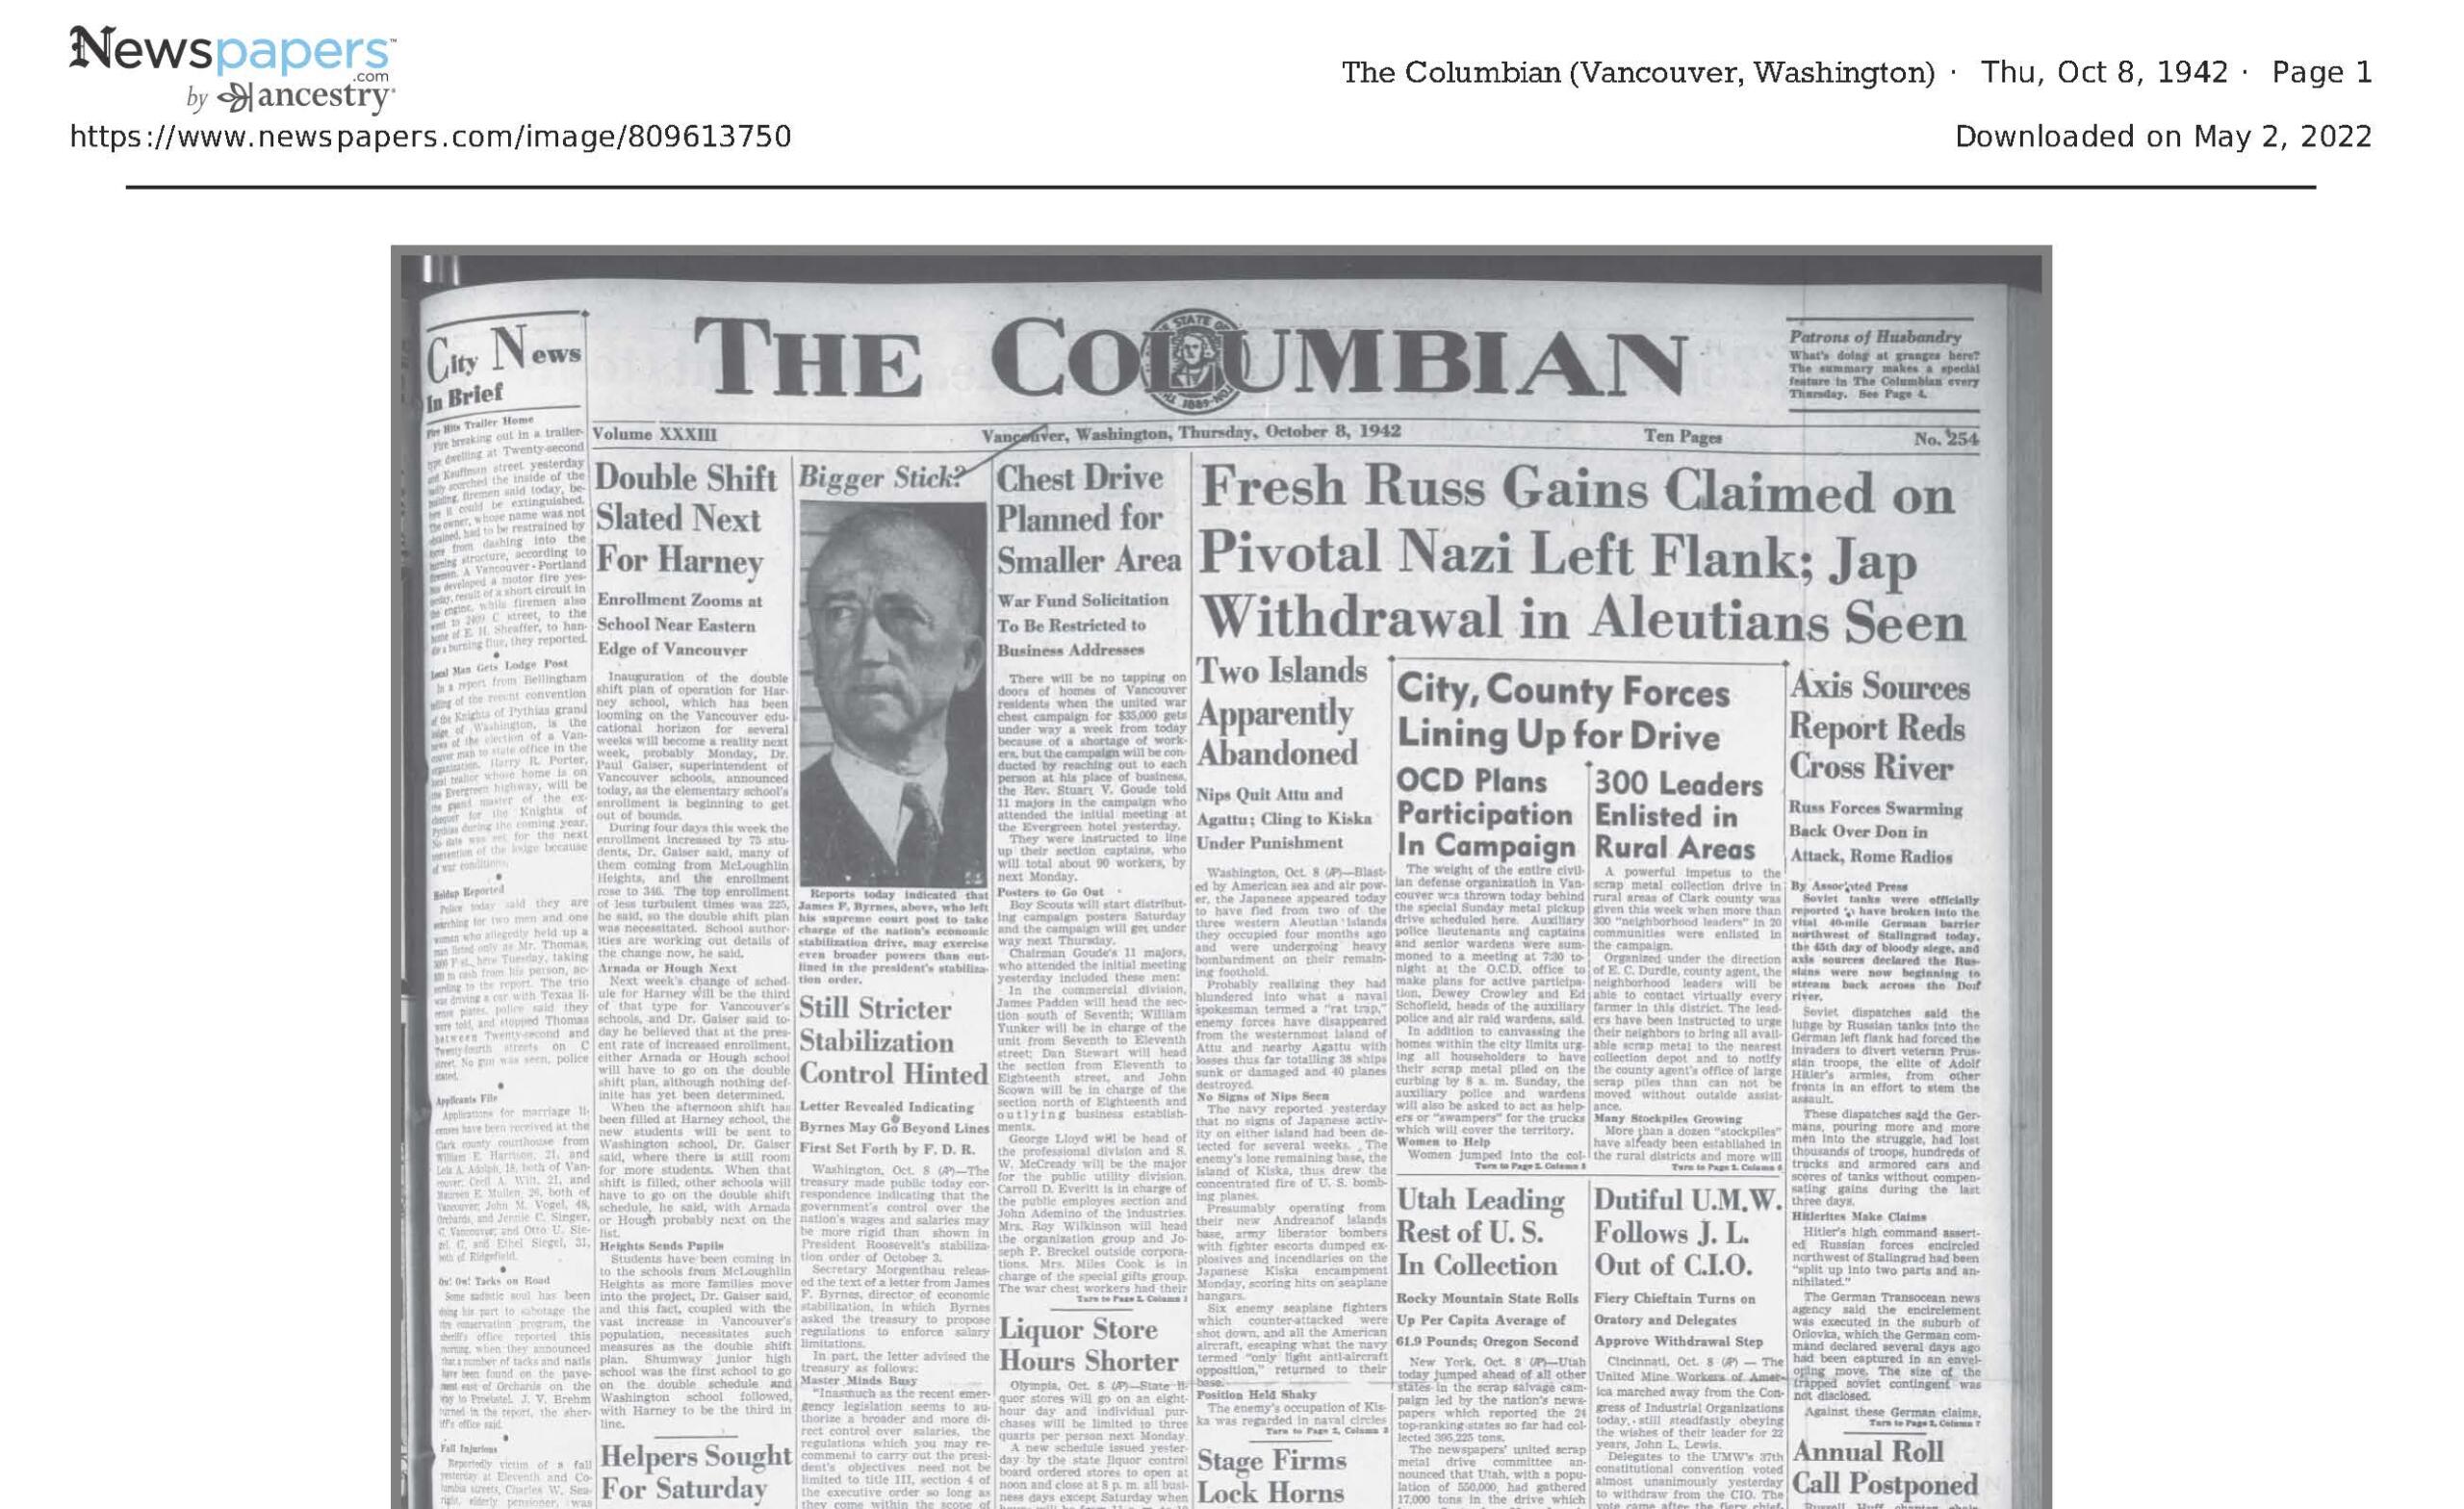 The cover of The Columbian on Oct.